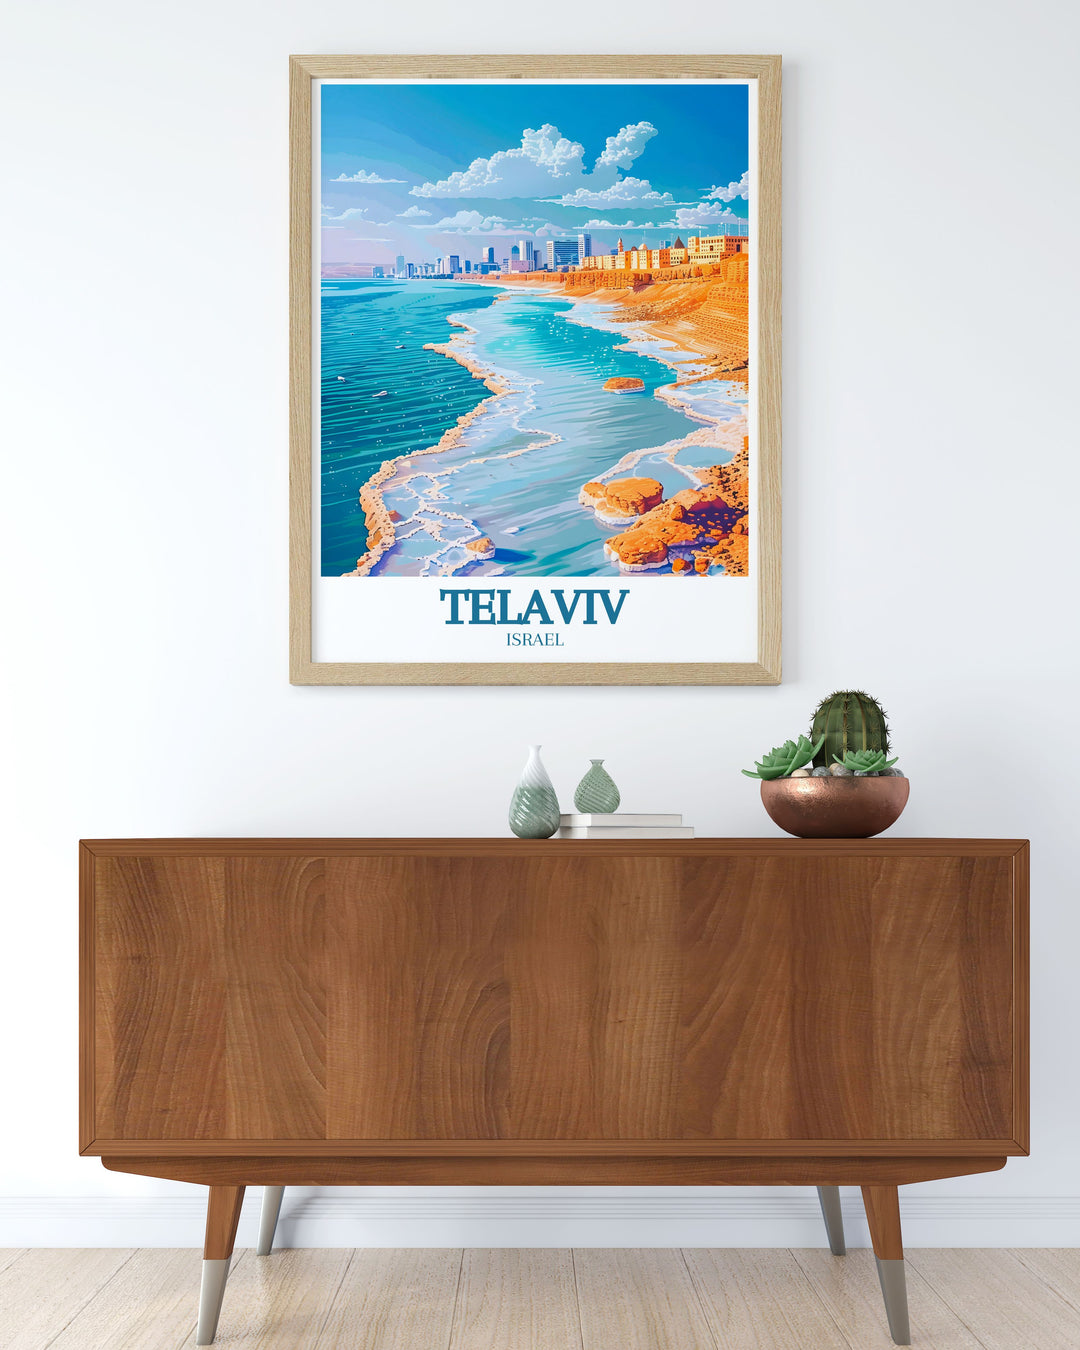 The dynamic energy of Tel Avivs bustling streets and iconic skyline is highlighted in this travel poster. Ideal for urban enthusiasts, this piece captures the lively spirit of the city.